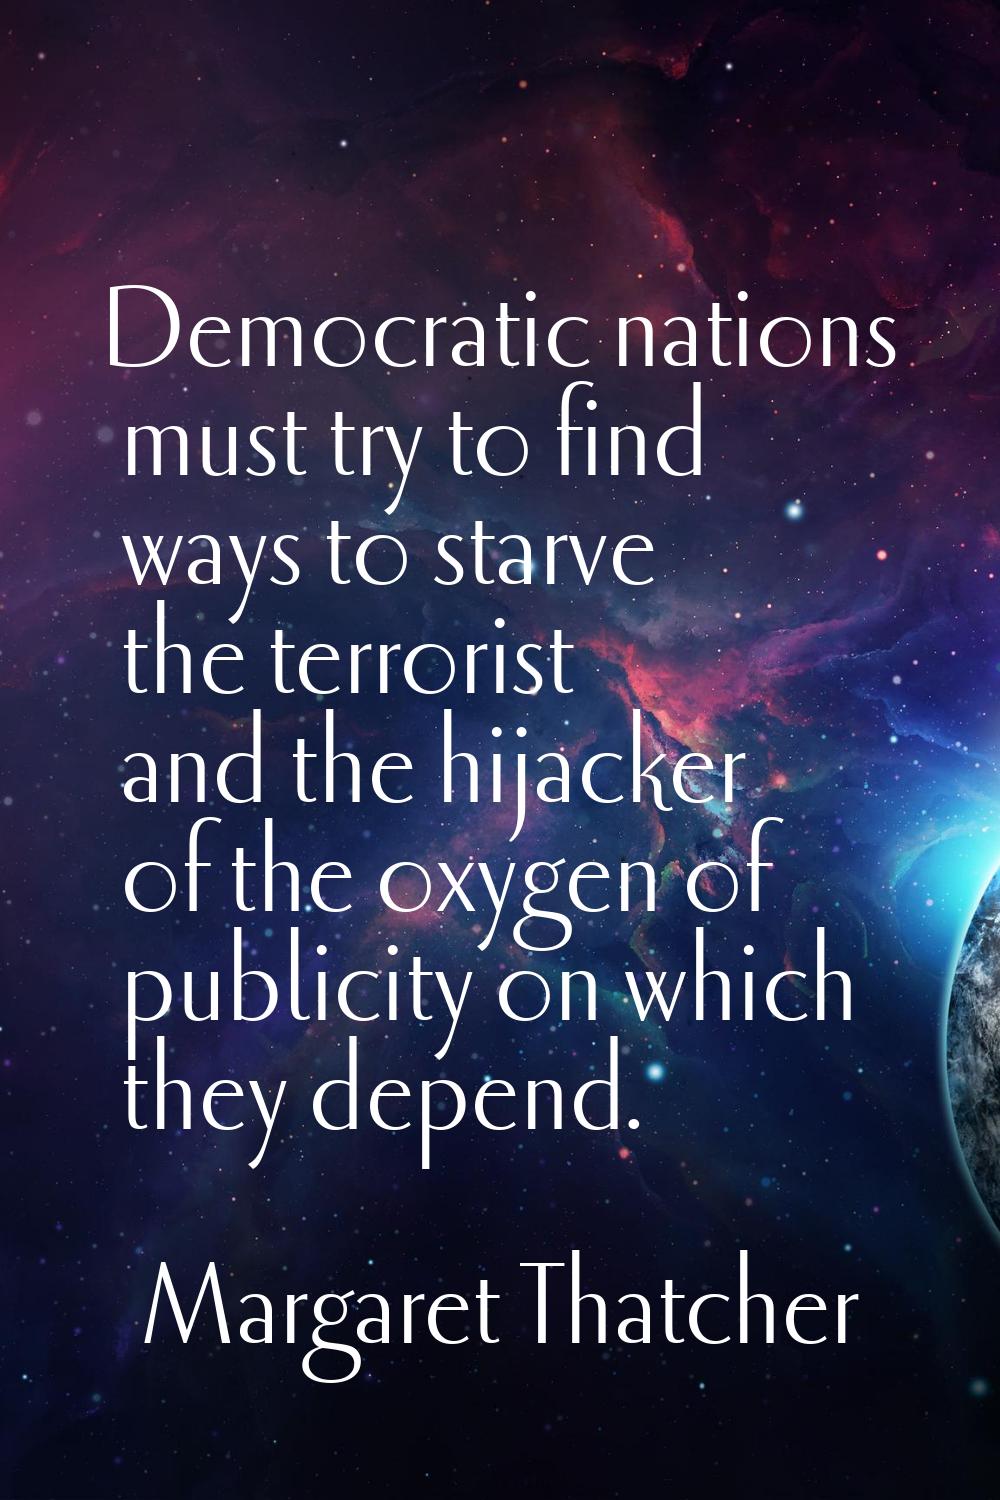 Democratic nations must try to find ways to starve the terrorist and the hijacker of the oxygen of 